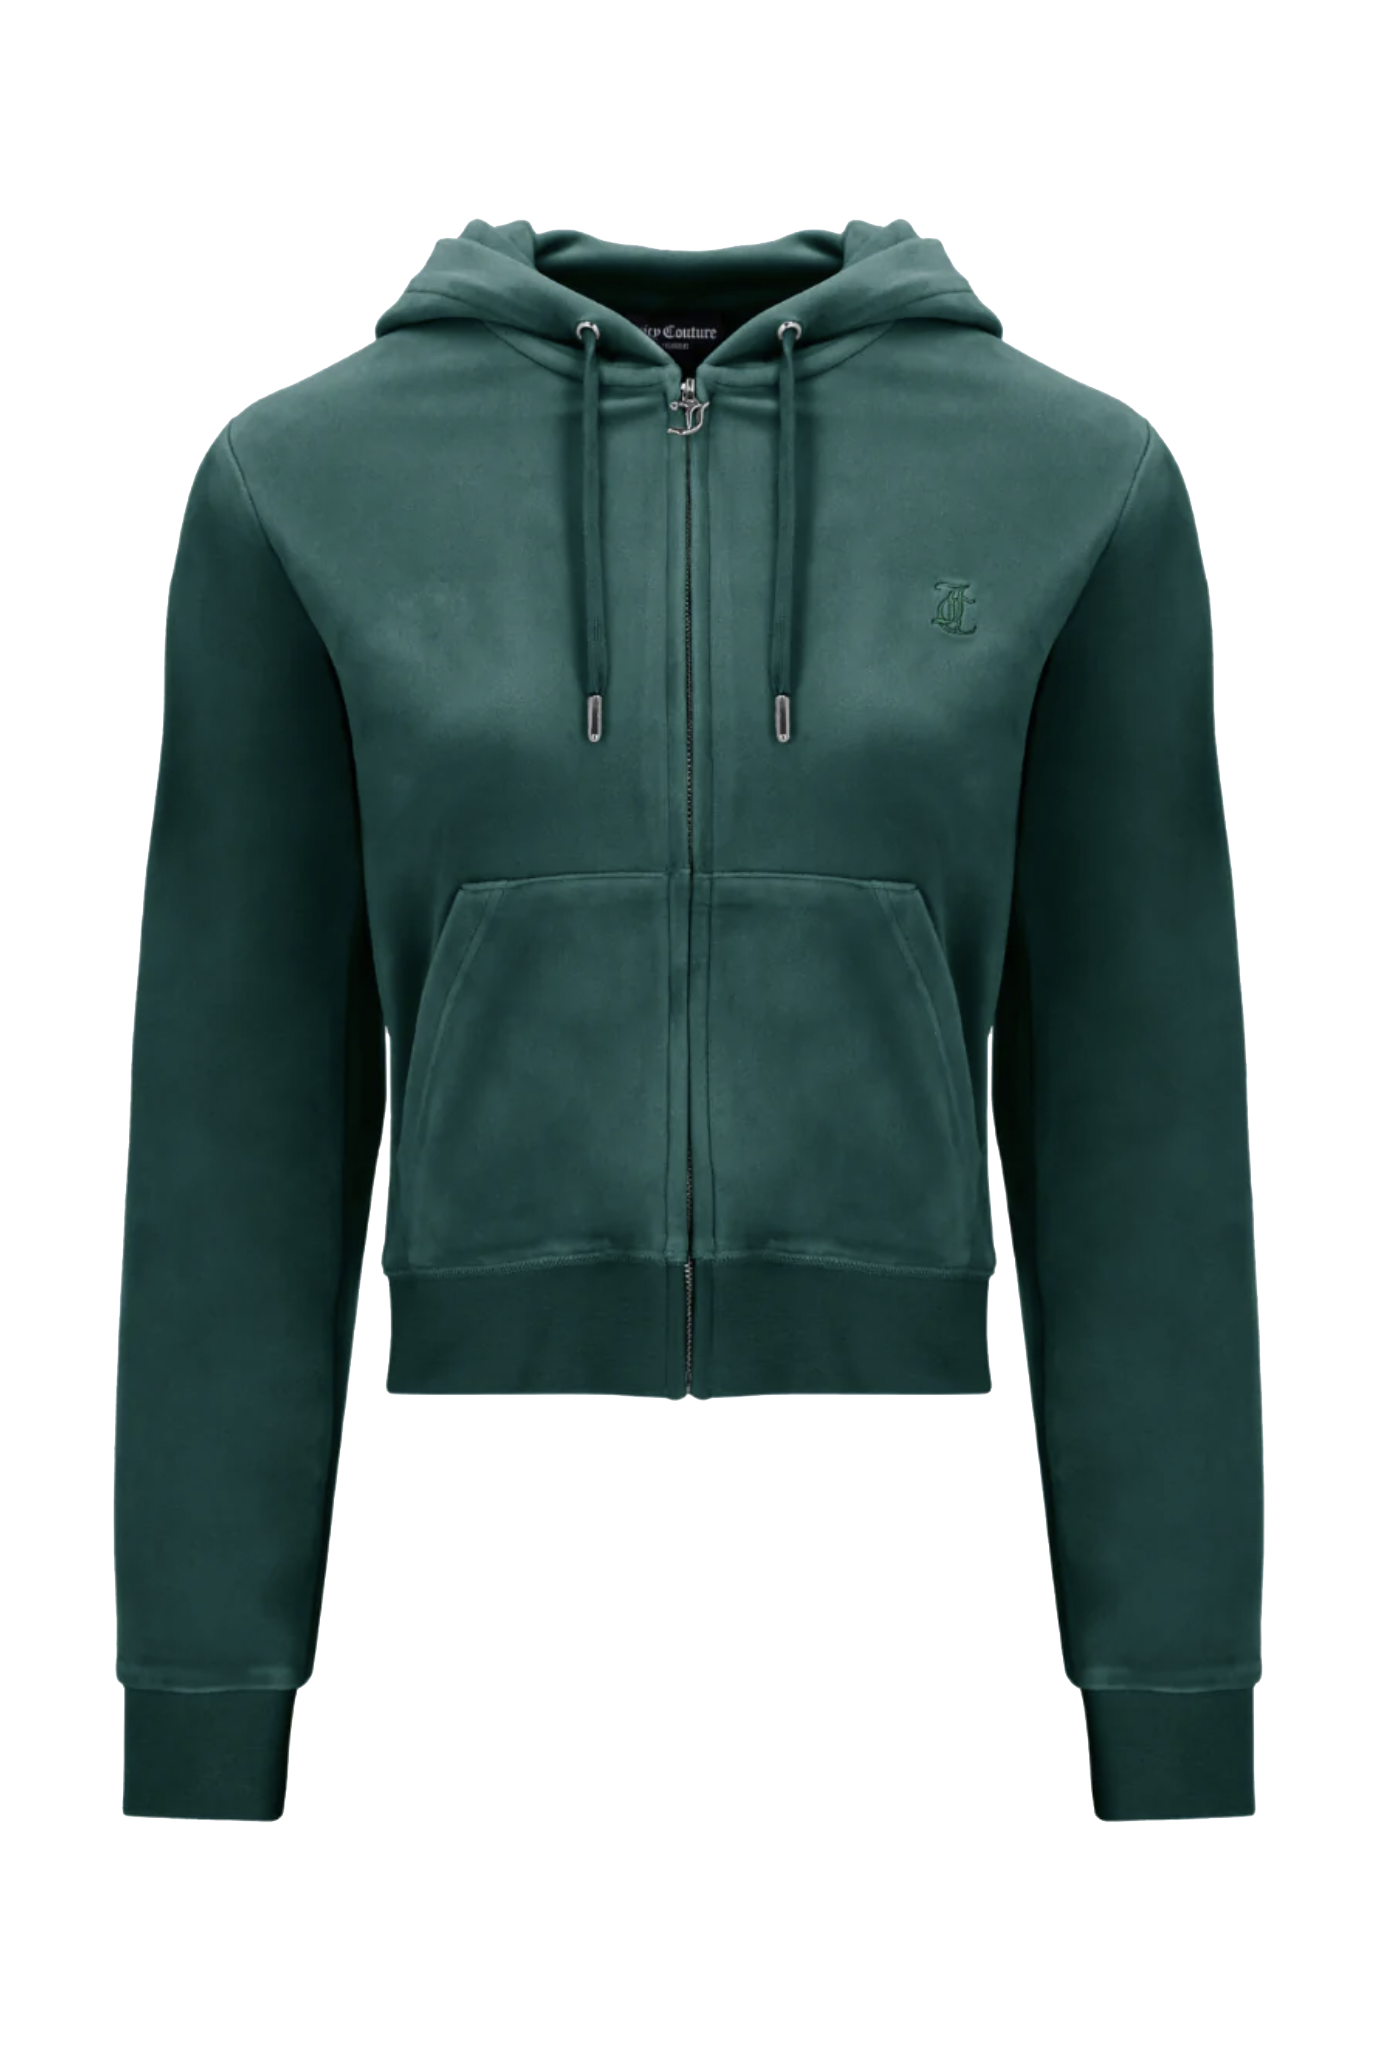 Juicy Couture Robertson Classic Velour Hoodie - Rain Forest